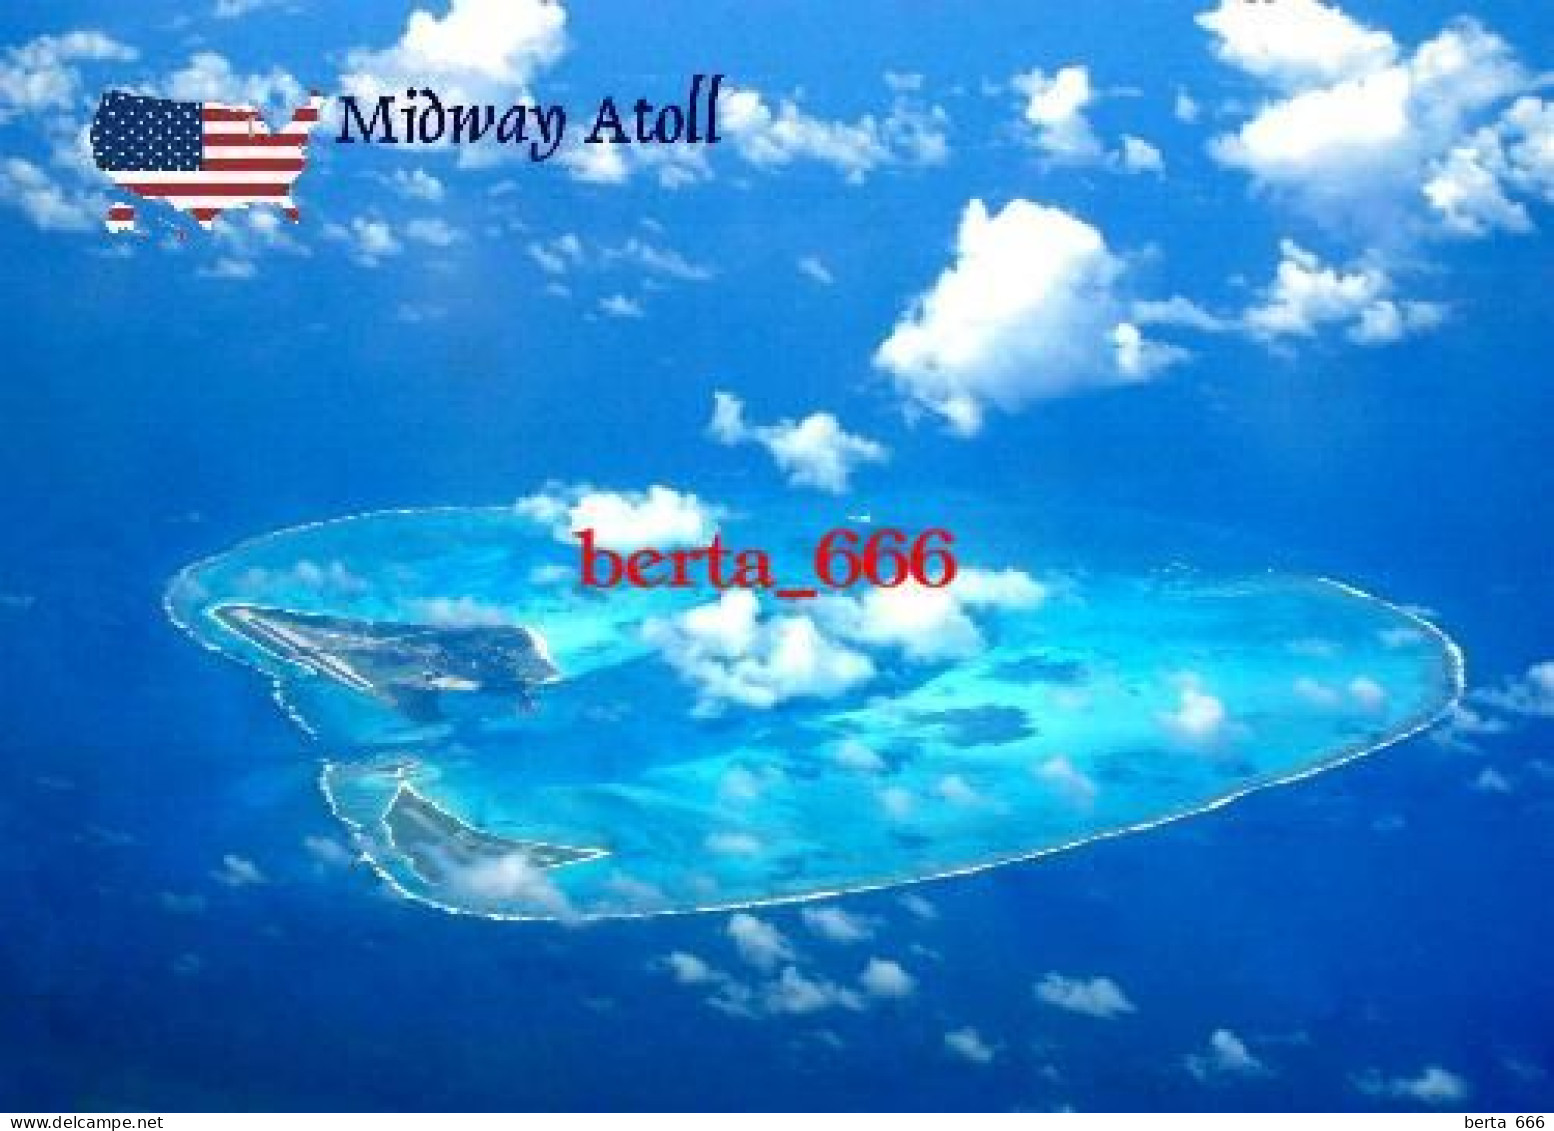 United States Midway Atoll Aerial View New Postcard - Midway Islands